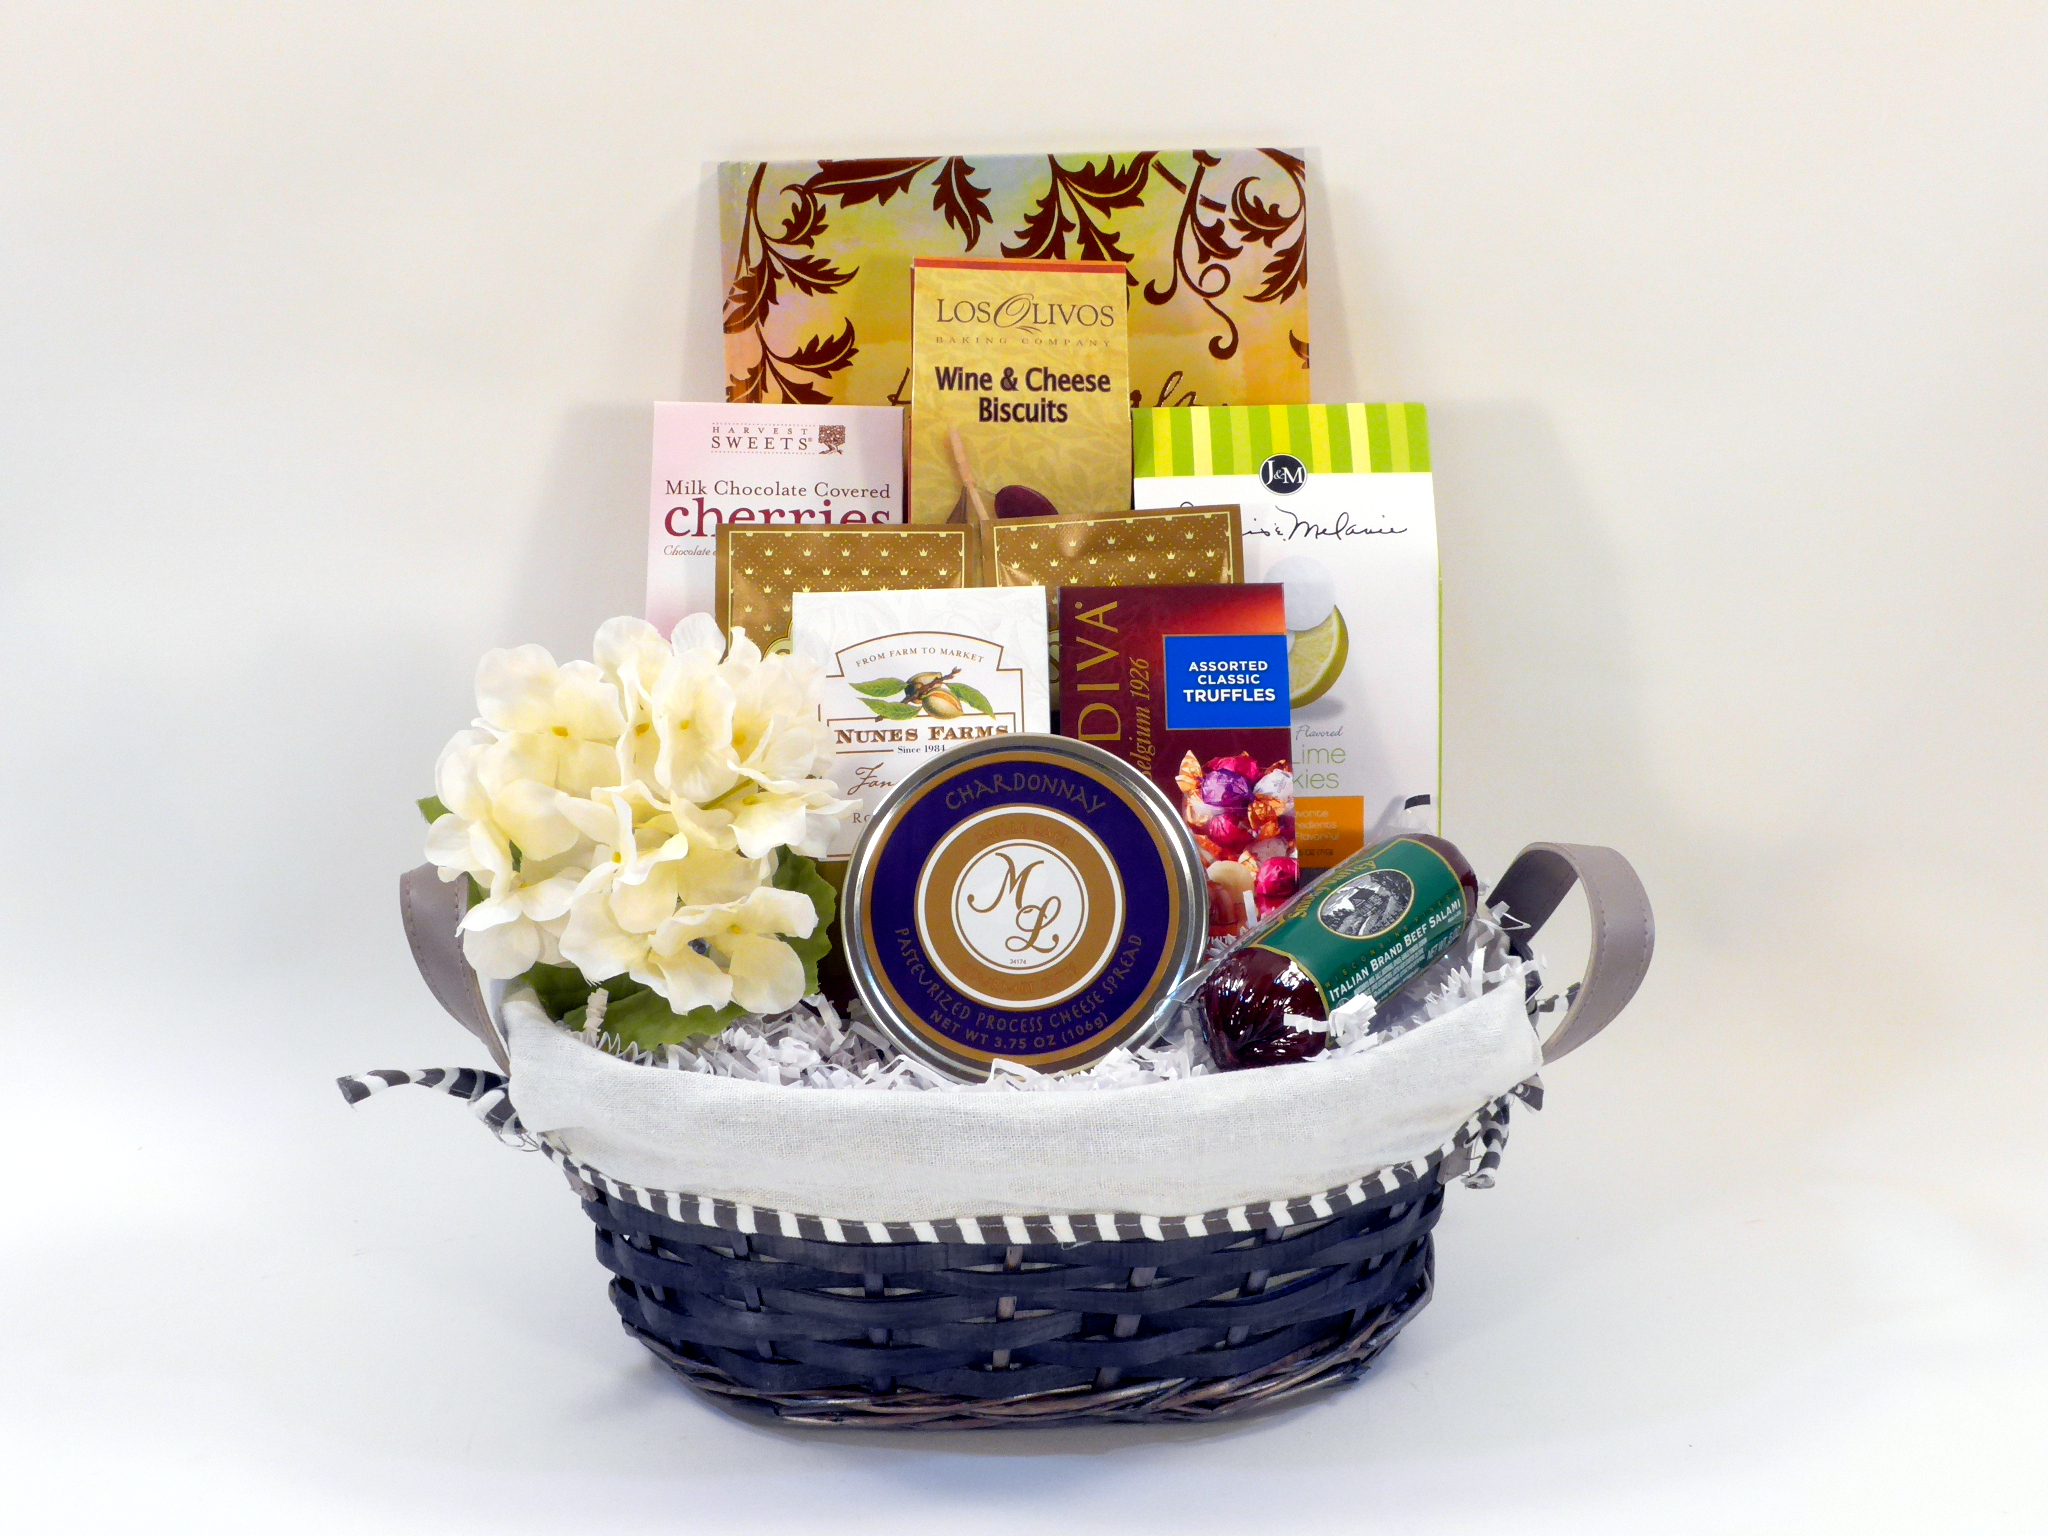 The Sweetest Candy Gift Basket